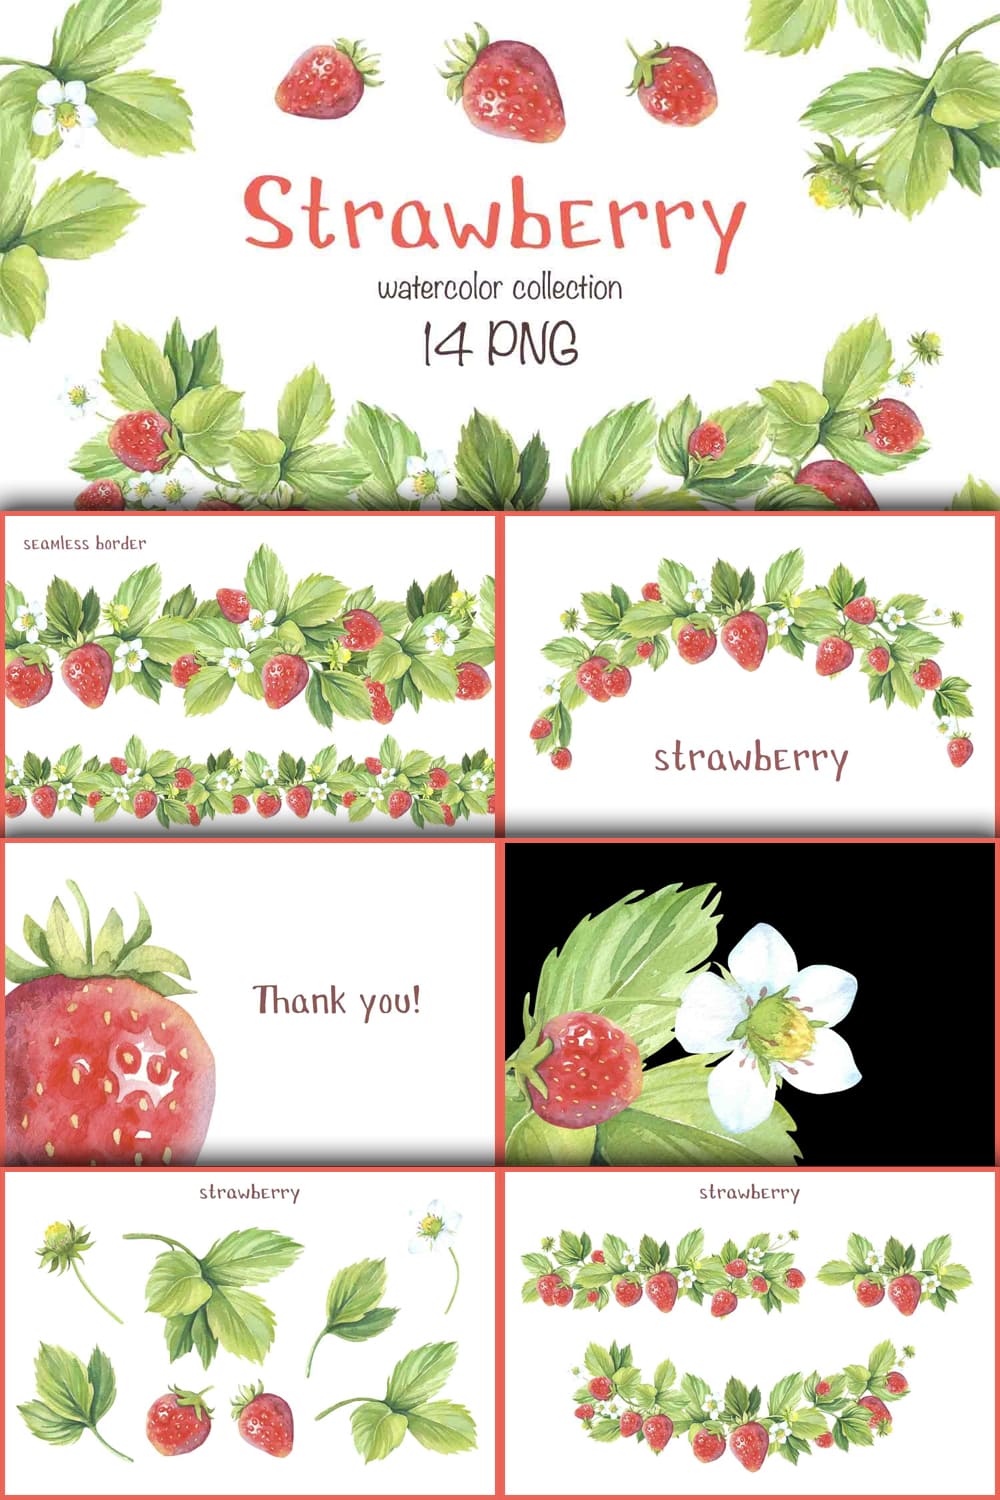 All slides with a watercolor collection of strawberries.